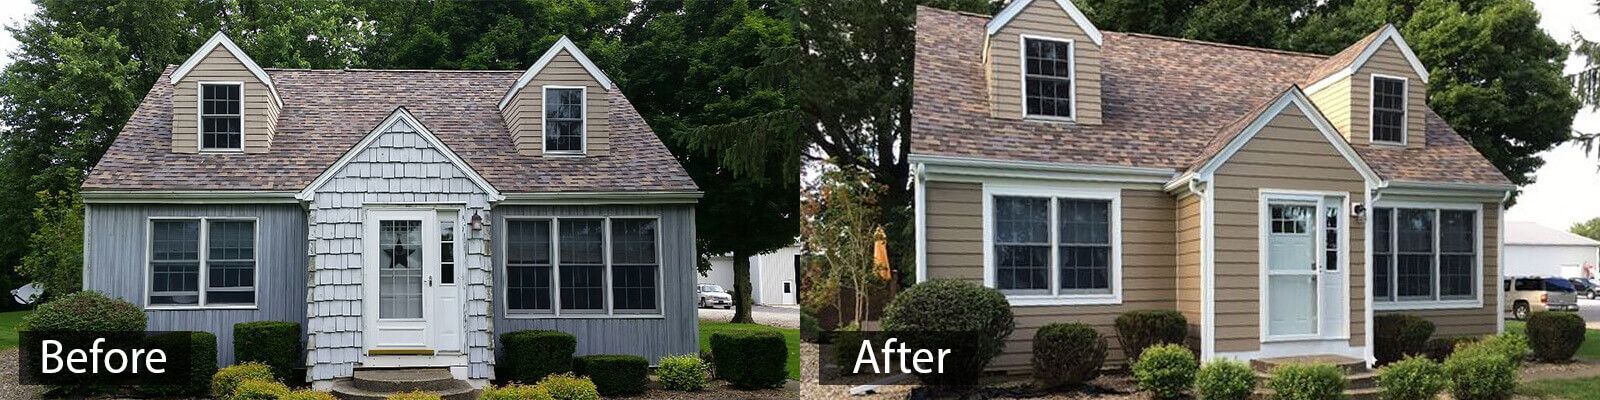 Baker before and after - South Bend, IN - A&M Home Services